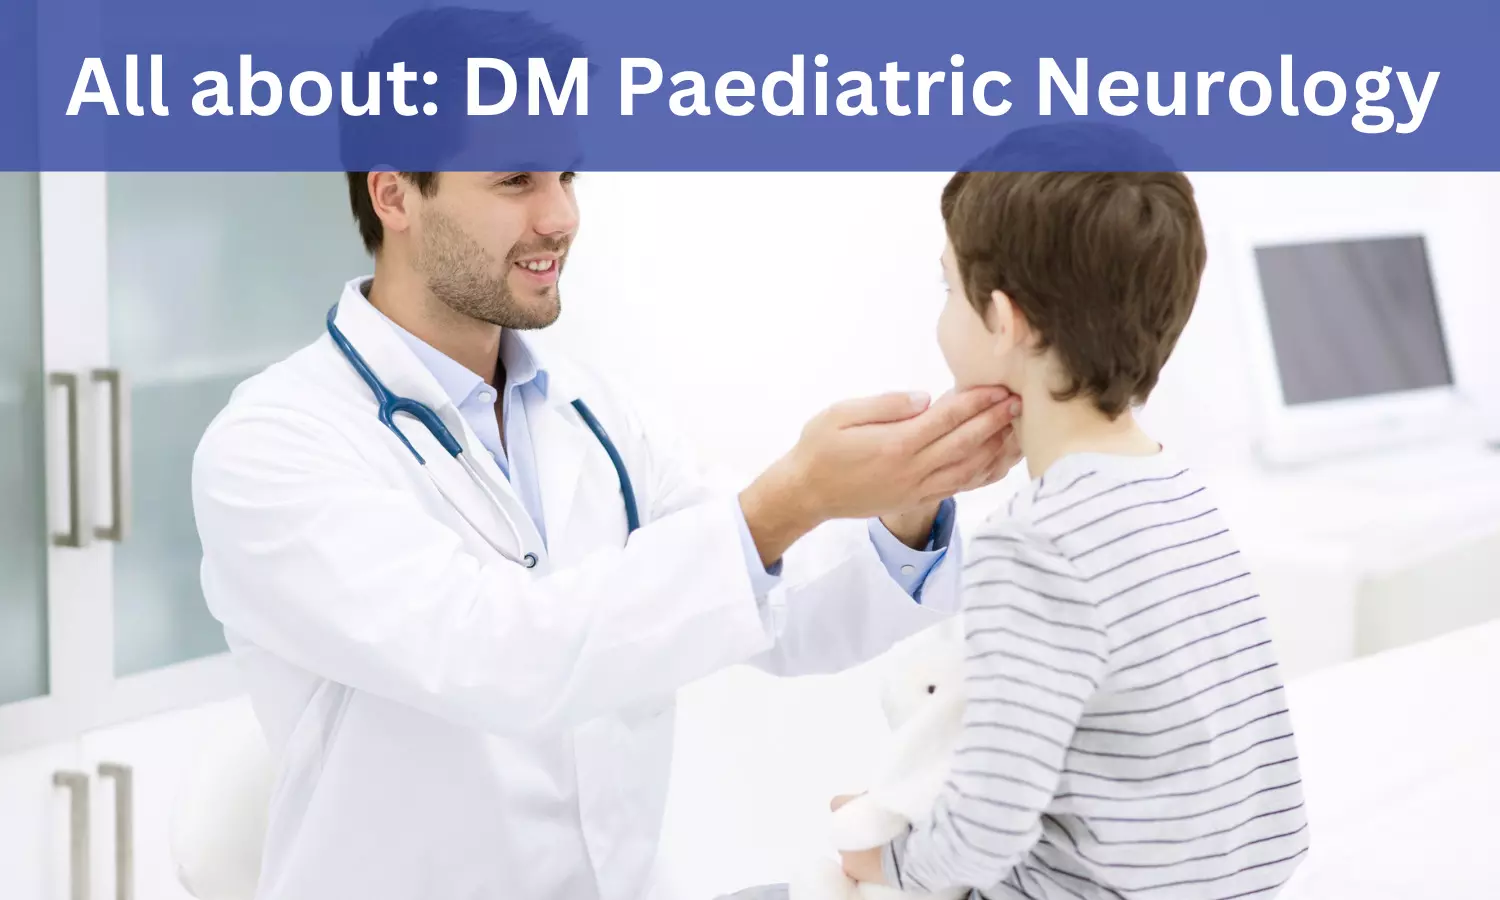 DM Paediatric Neurology: Admissions, Medical Colleges, Fees, Eligibility Criteria Details